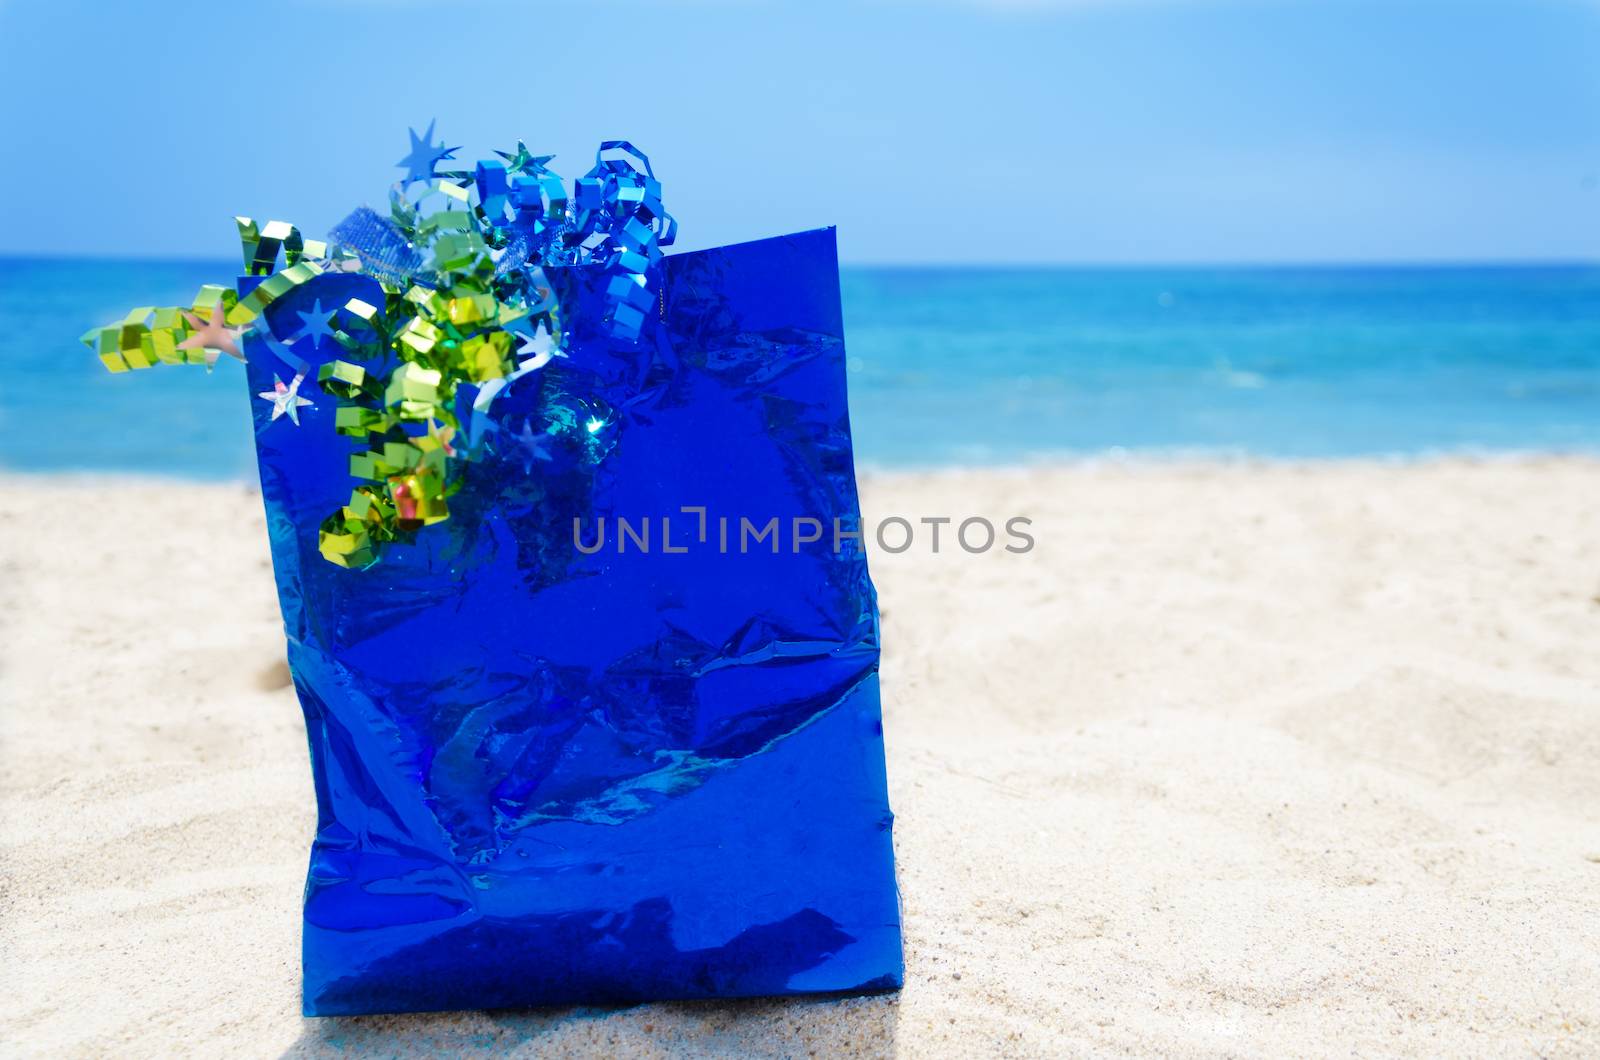 Blue gift bag on sandy beach in sunny day- holiday concept